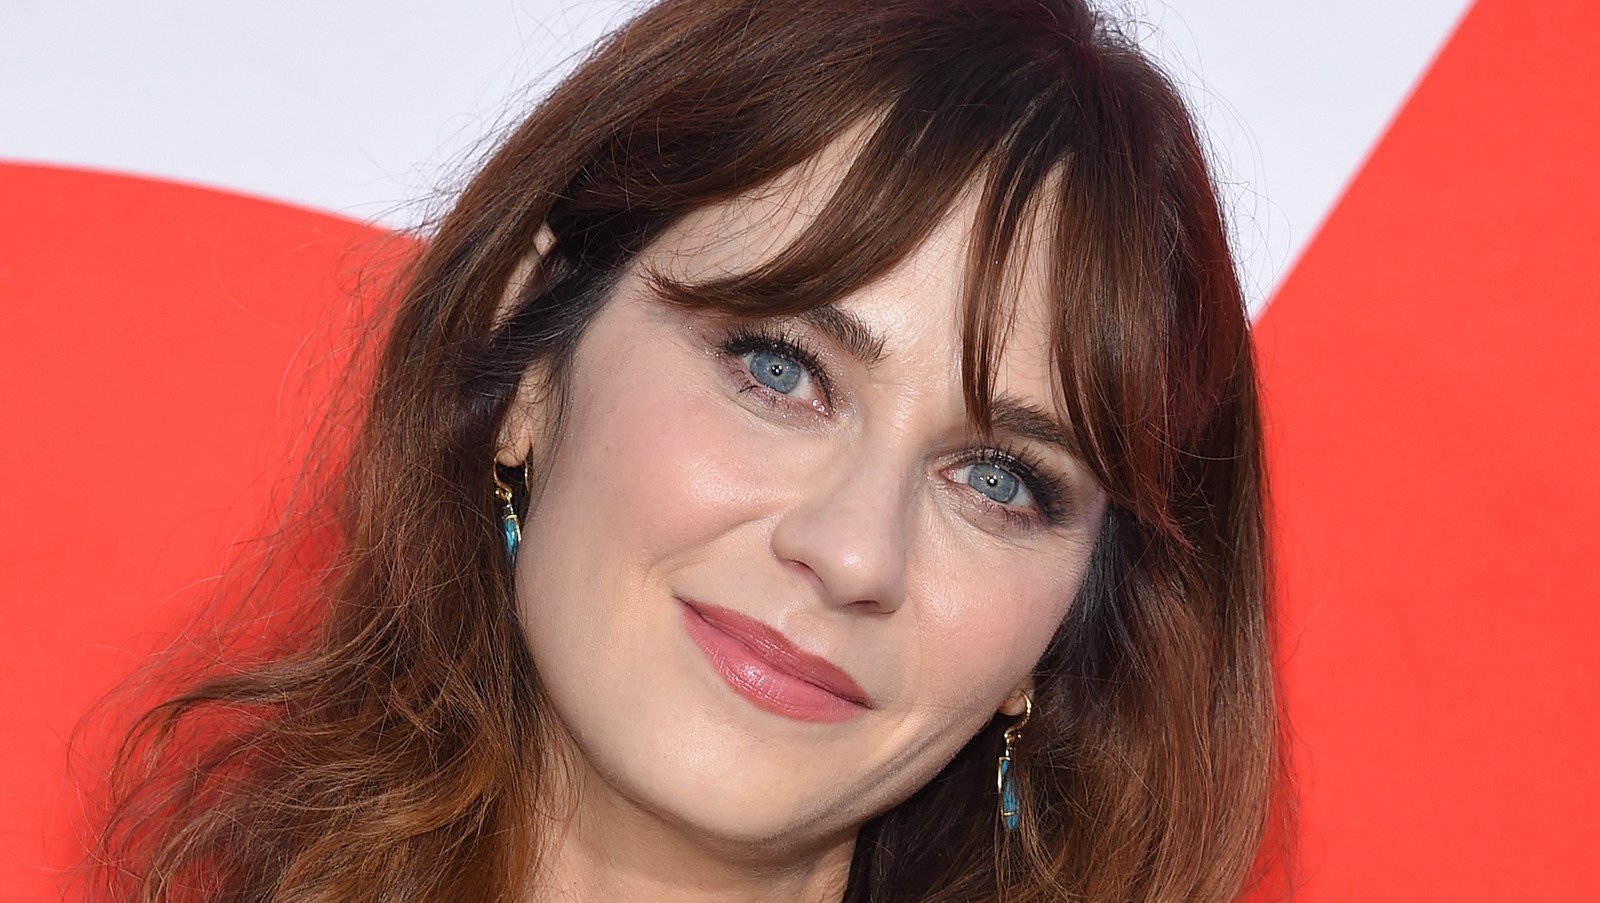 The Failure To Launch Character You Likely Forgot Zooey Deschanel Played